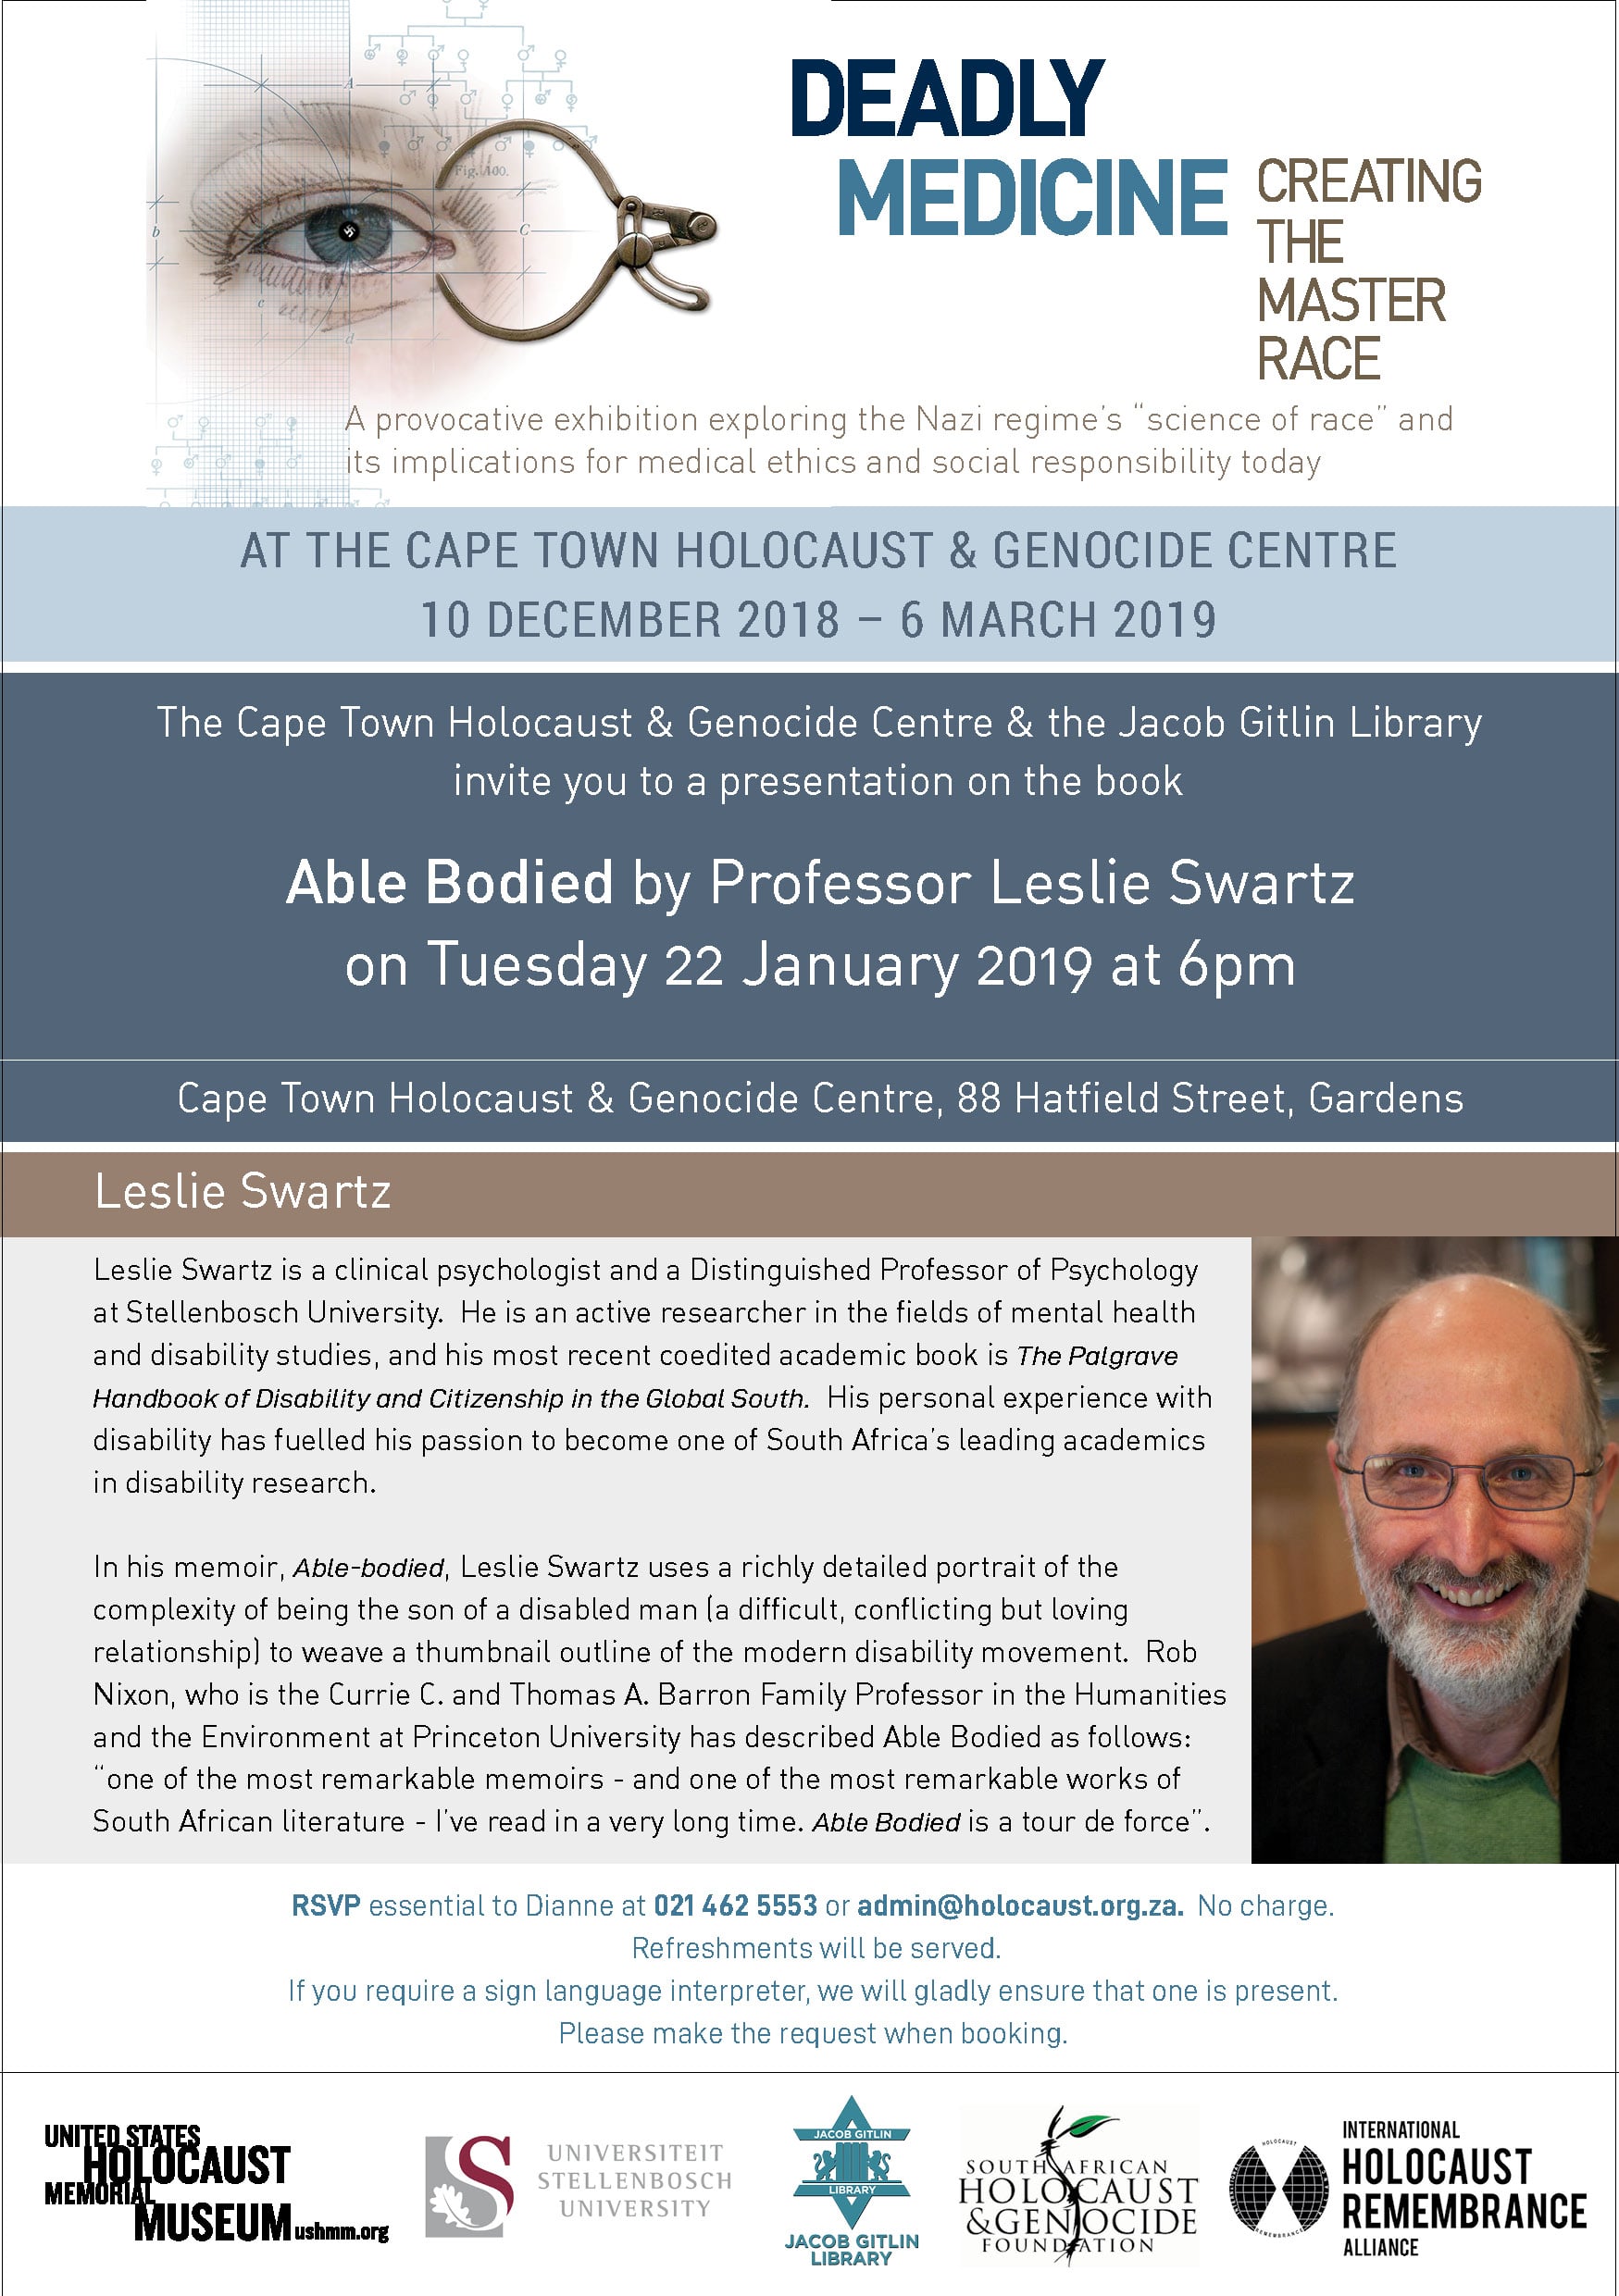 Able Bodied lecture by Leslie Swartz